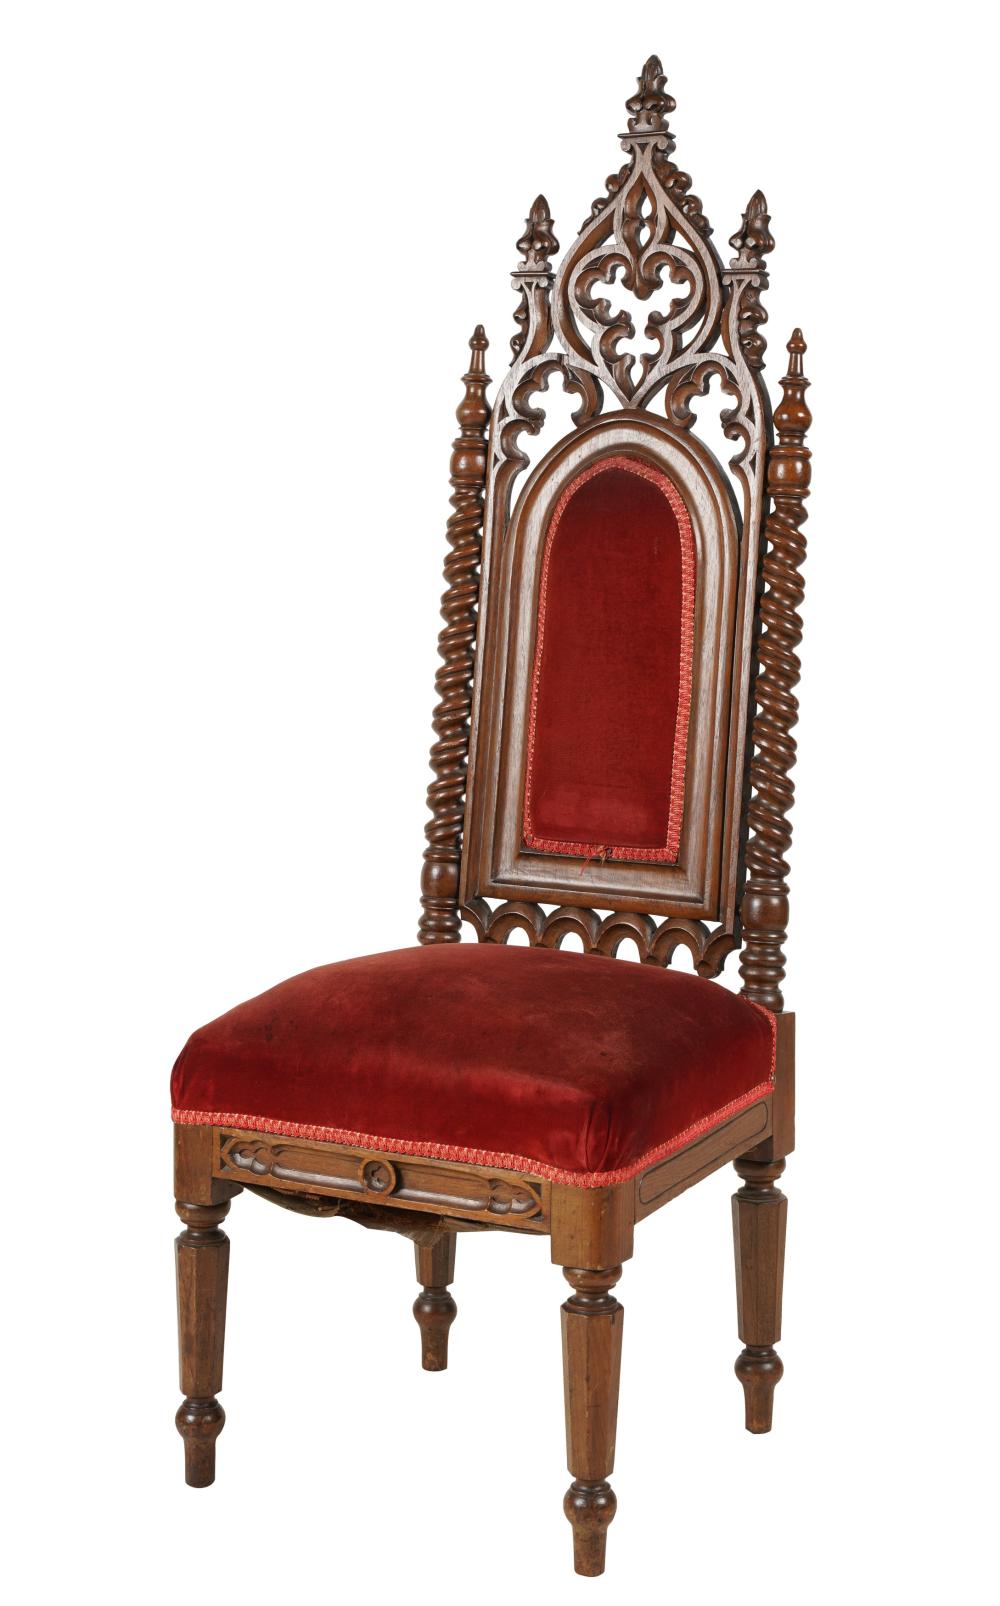 GOTHIC-STYLE CARVED CHAIRwith red